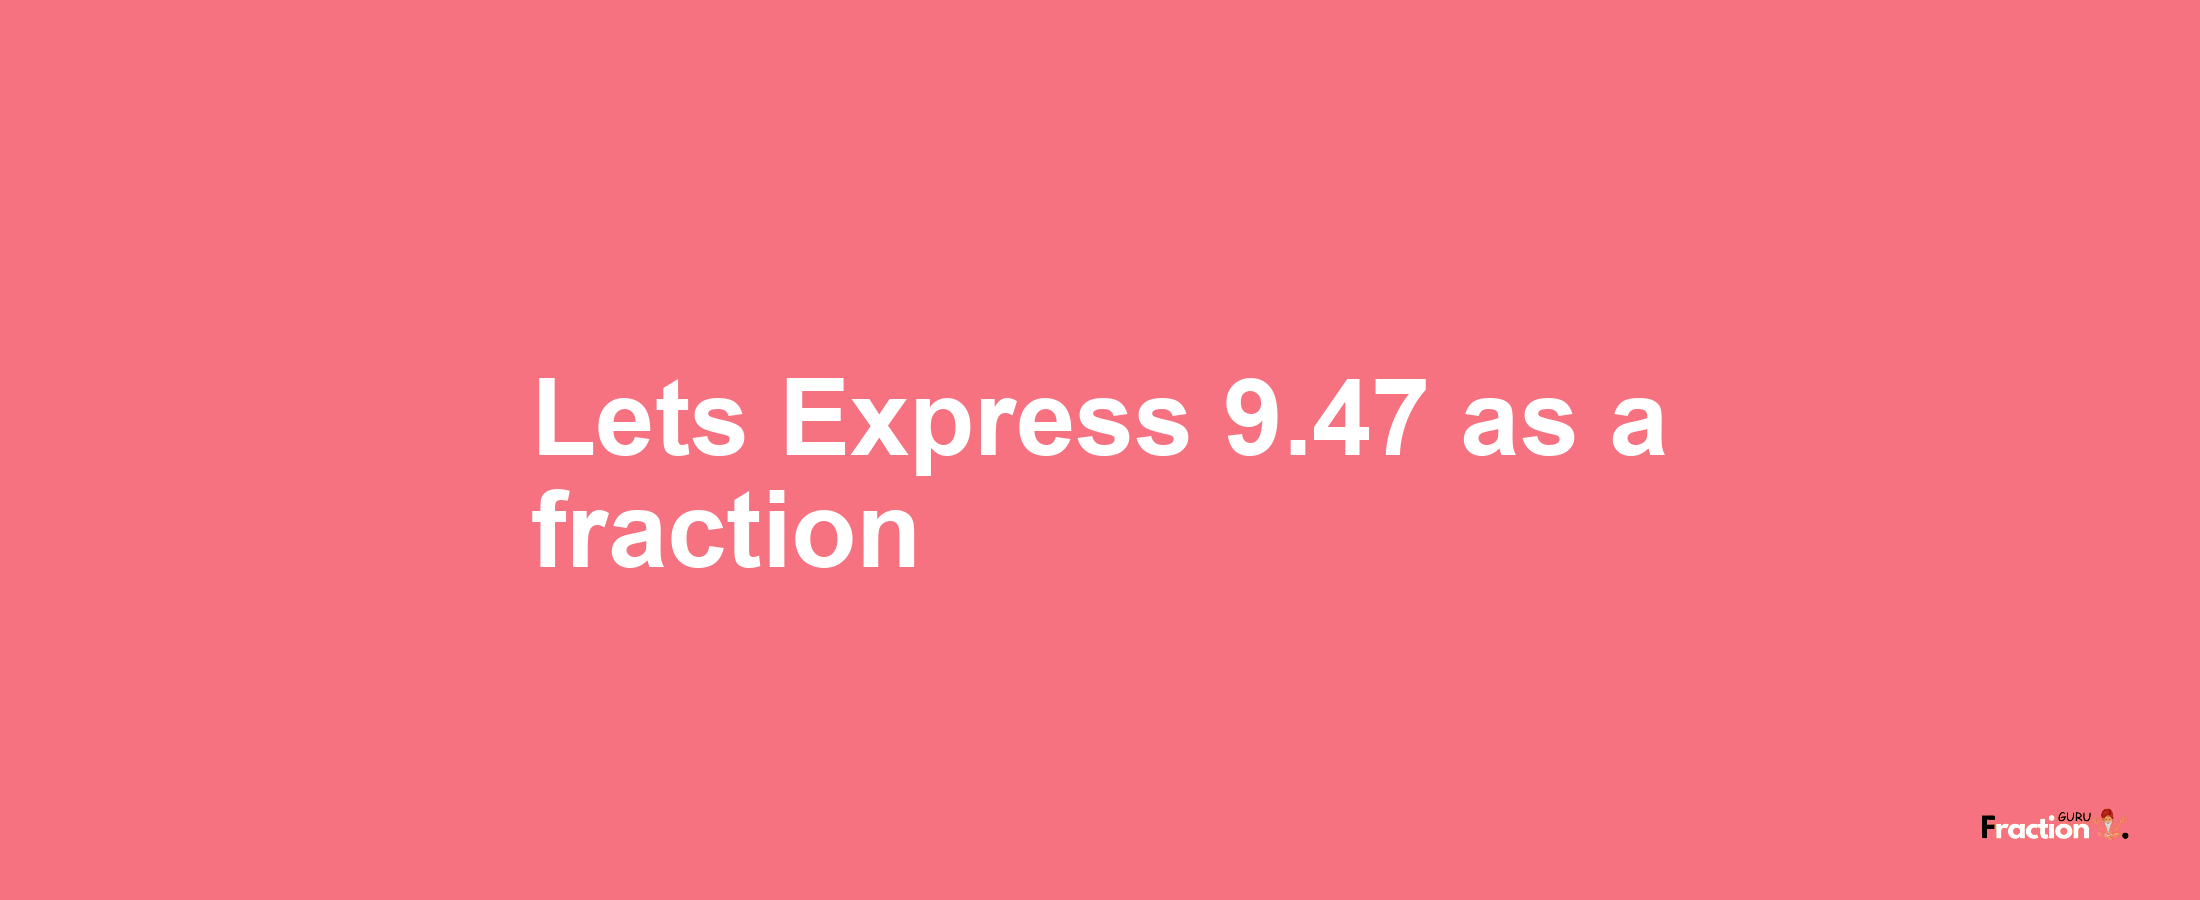 Lets Express 9.47 as afraction